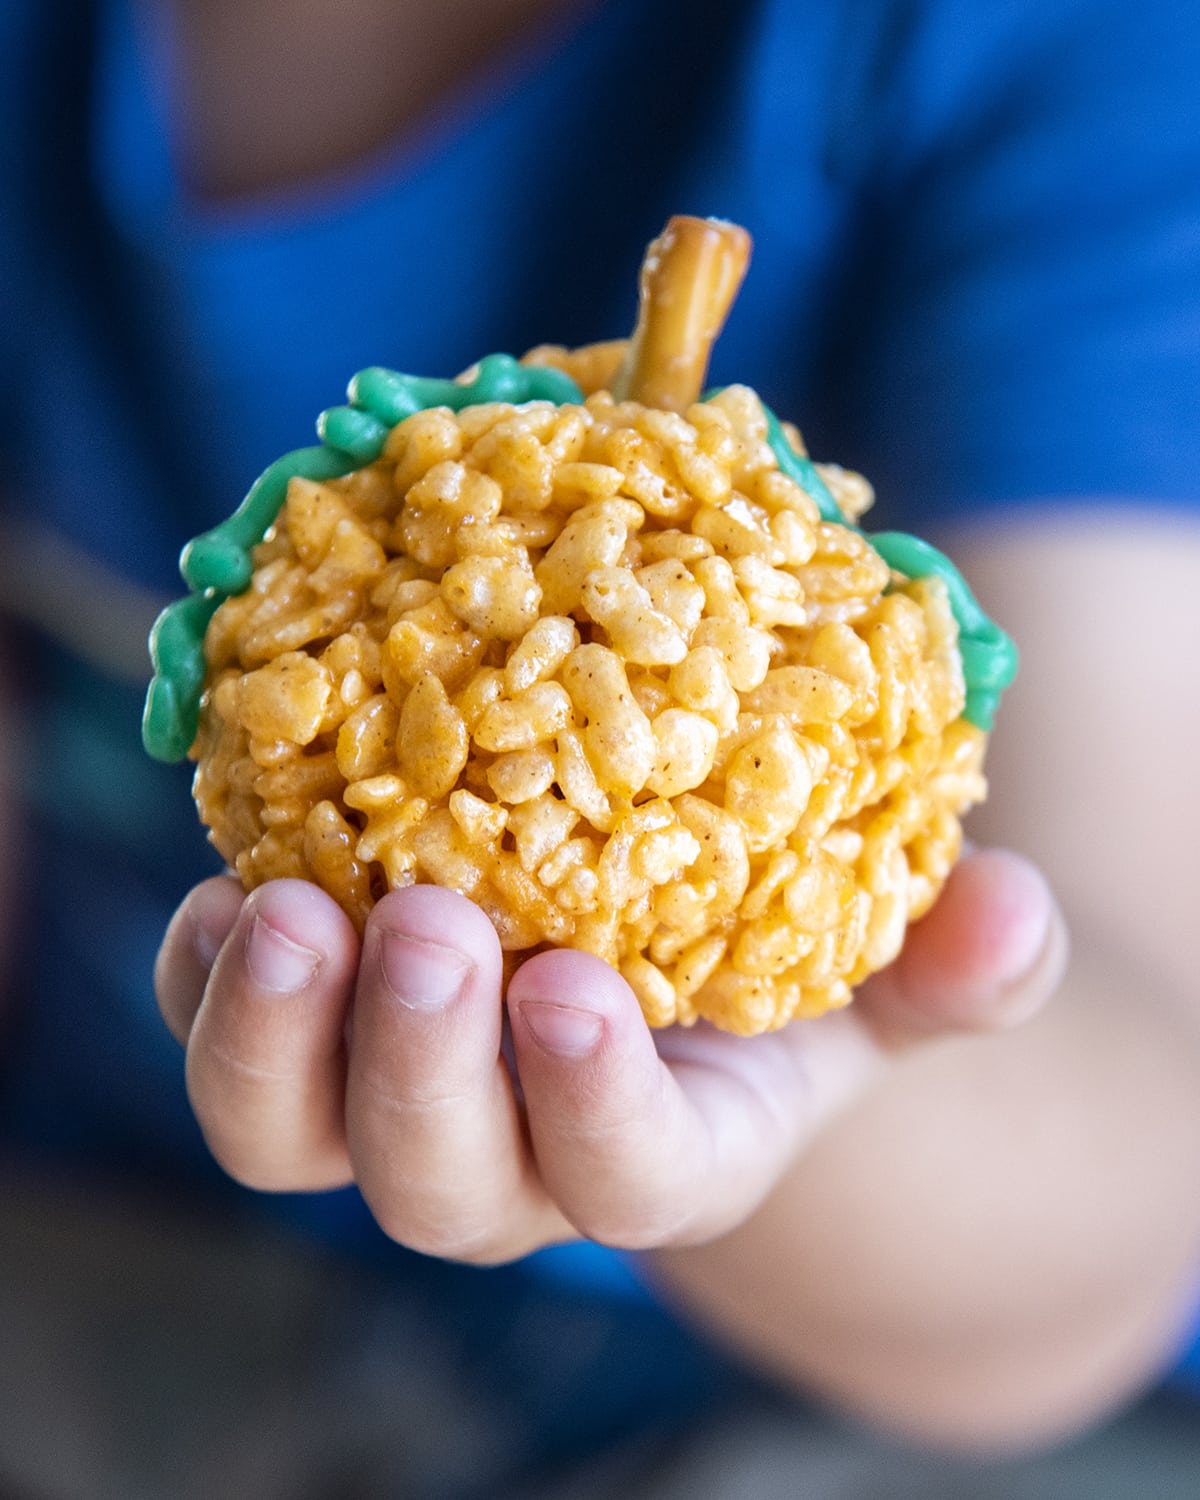 A child's hand holding a rice krispie treat that is shaped and colored to look like a pumpkin.